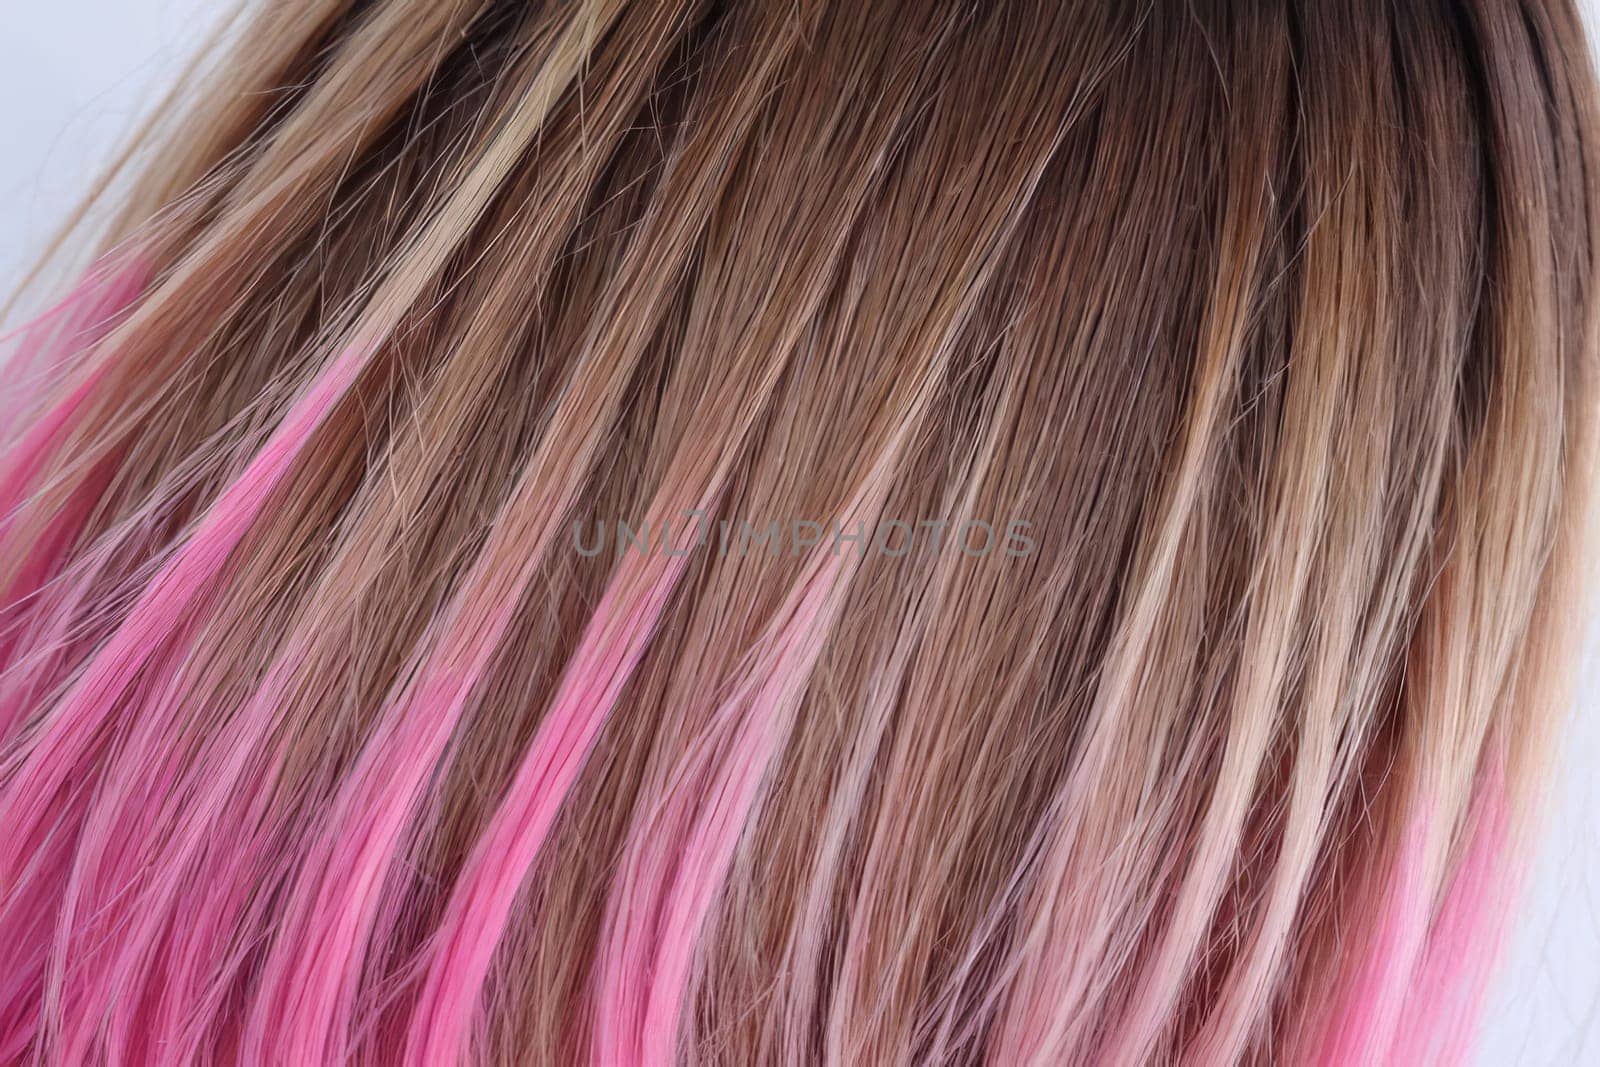 A mesmerizing close-up photo capturing the ombre elegance of beautiful pink hair, showcasing a seamless blend of delicate hues and tones